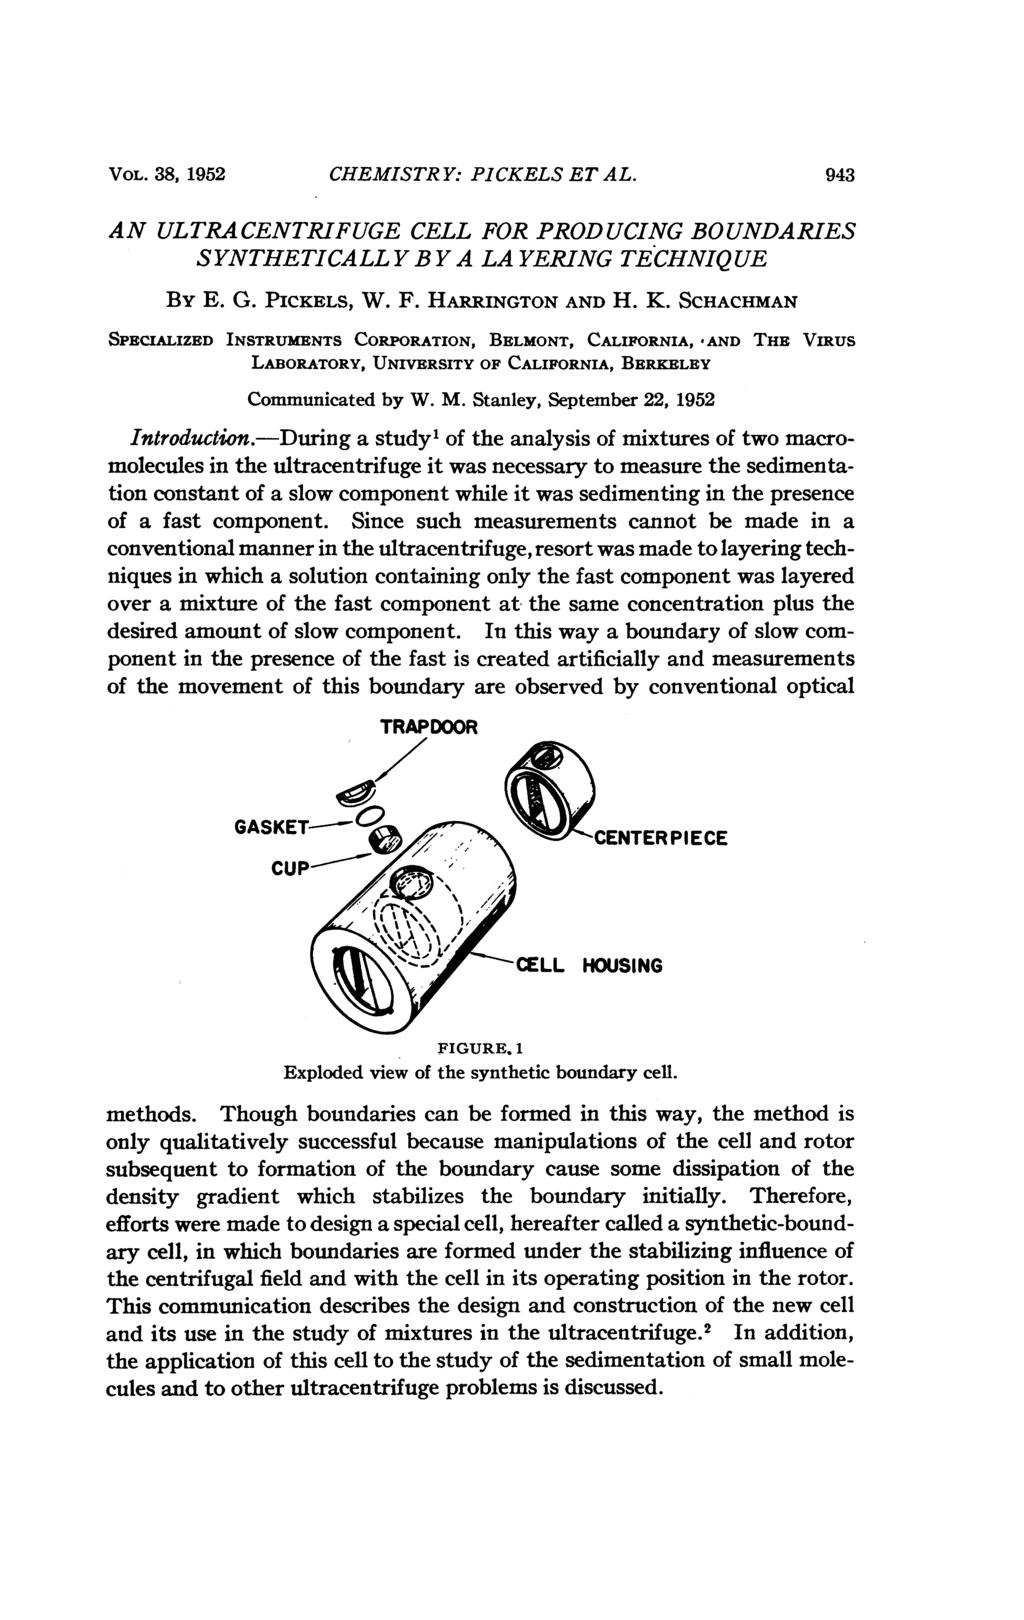 VOL. 38, 1952 CHEMISTRY: PICKELS ET AL. 943 AN ULTRACENTRIFUGE CELL FOR PRODUCING BOUNDARIES SYNTHETICALL Y B Y A LA YERING TECHNIQUE By E. G. PICKELS, W. F. HARRINGTON AND H. K.